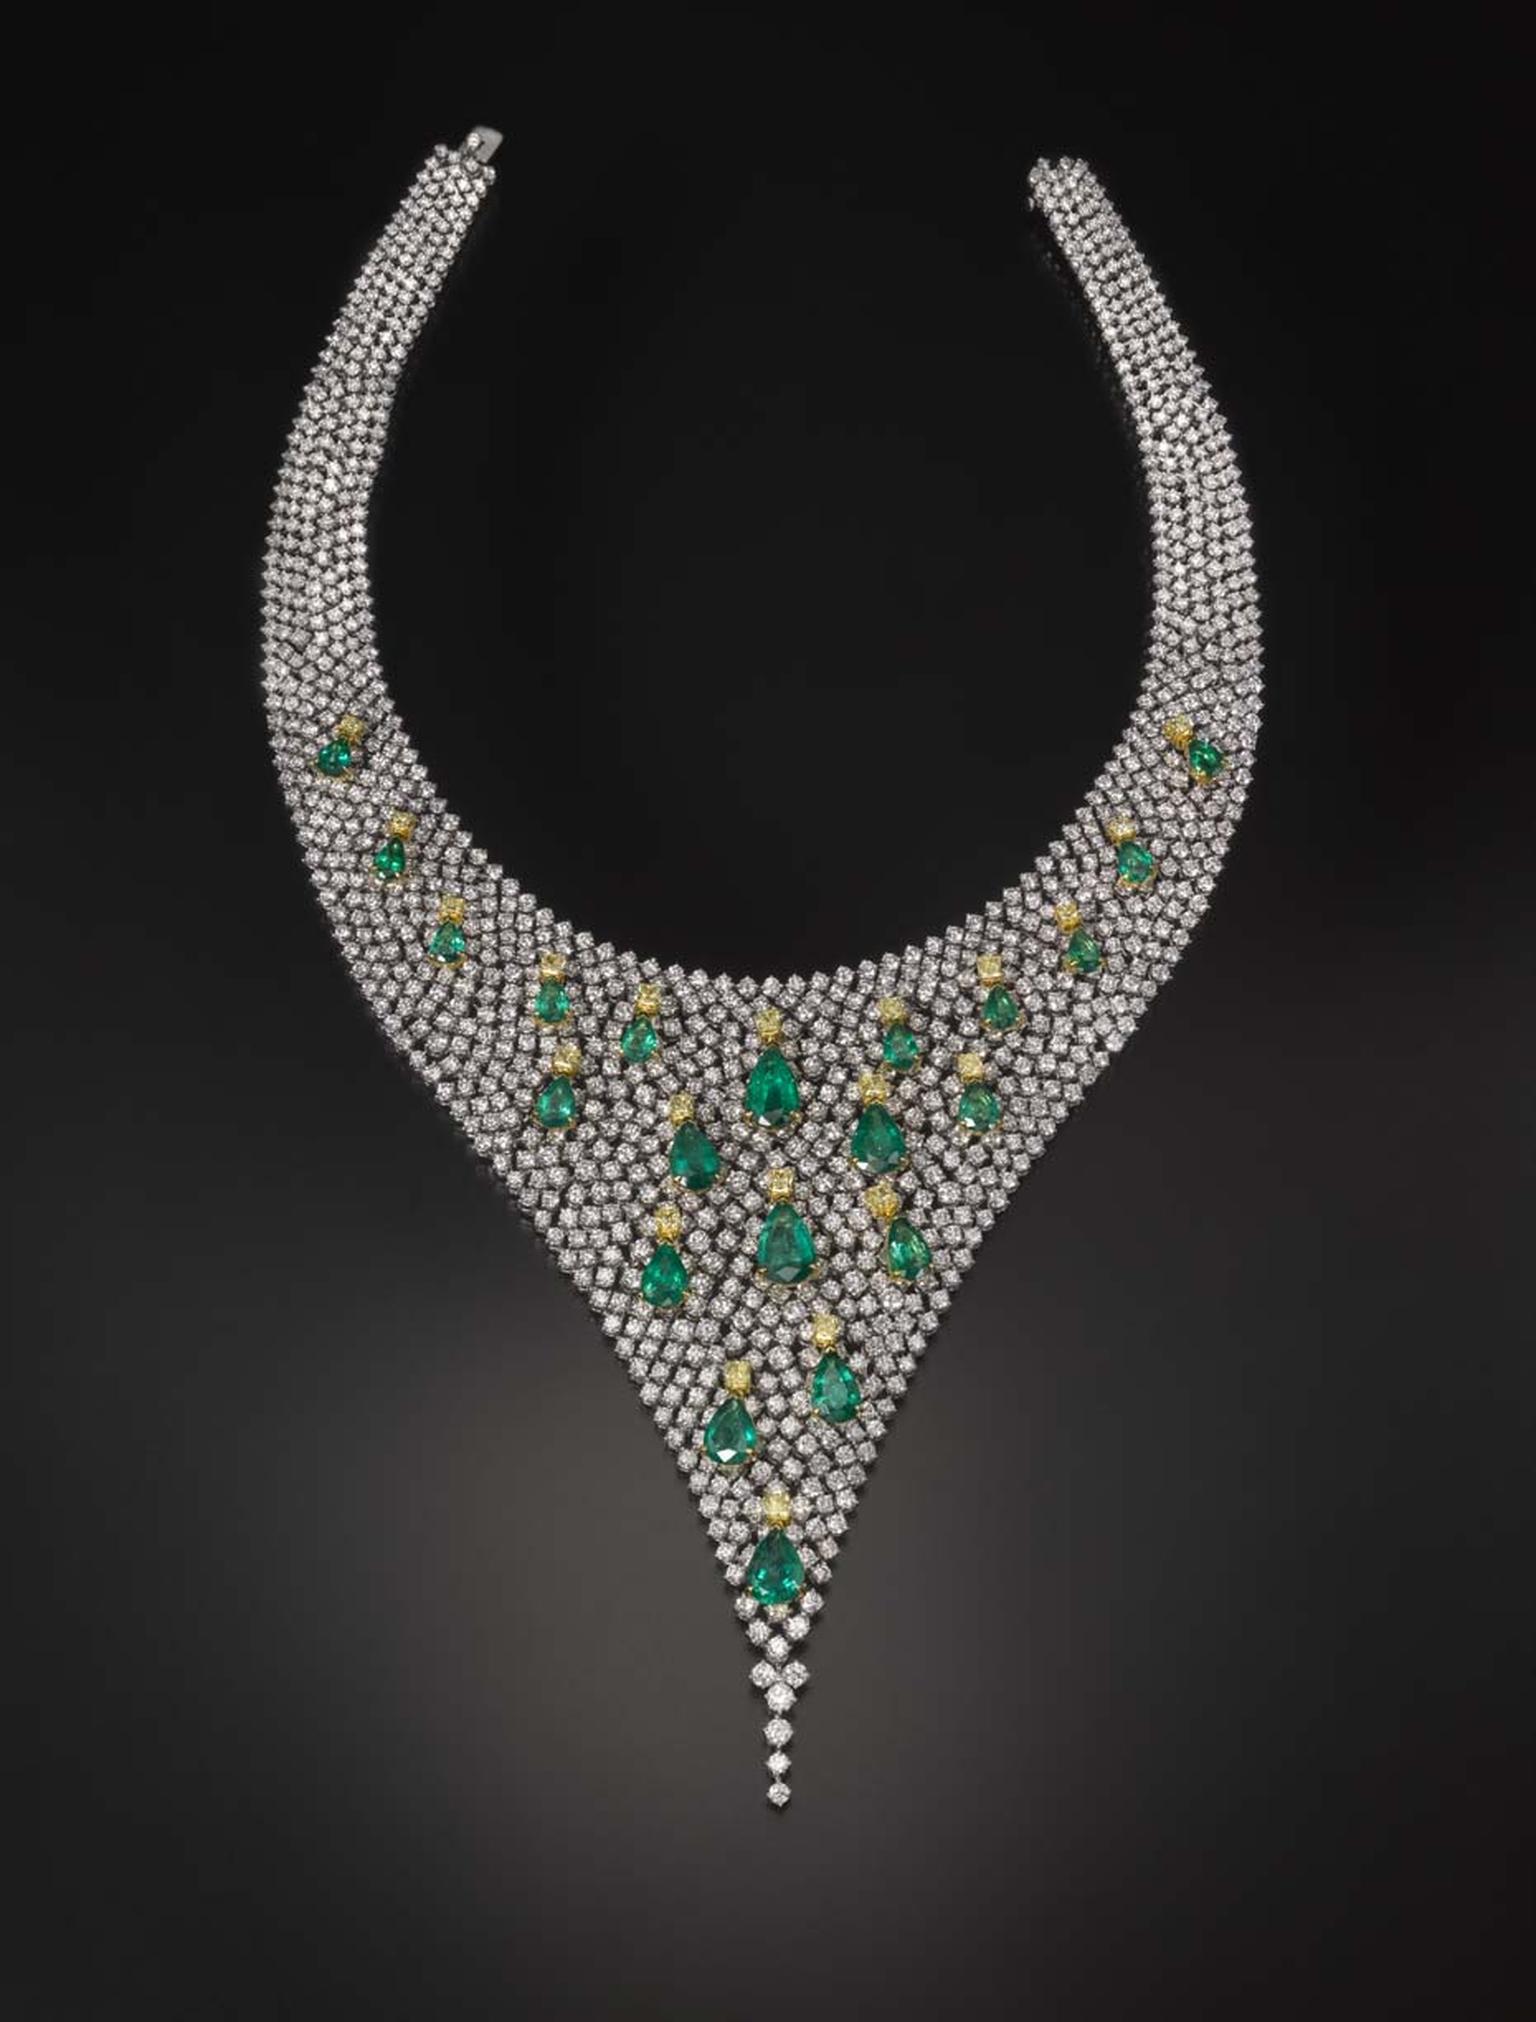 Emerald, yellow diamond and white diamond Butani necklace, inspired by a Water Lily pond. The emeralds are set so that they resemble floating lily pads. The necklace and matching earrings are set with a total of 80ct of diamonds and 34ct of emeralds.